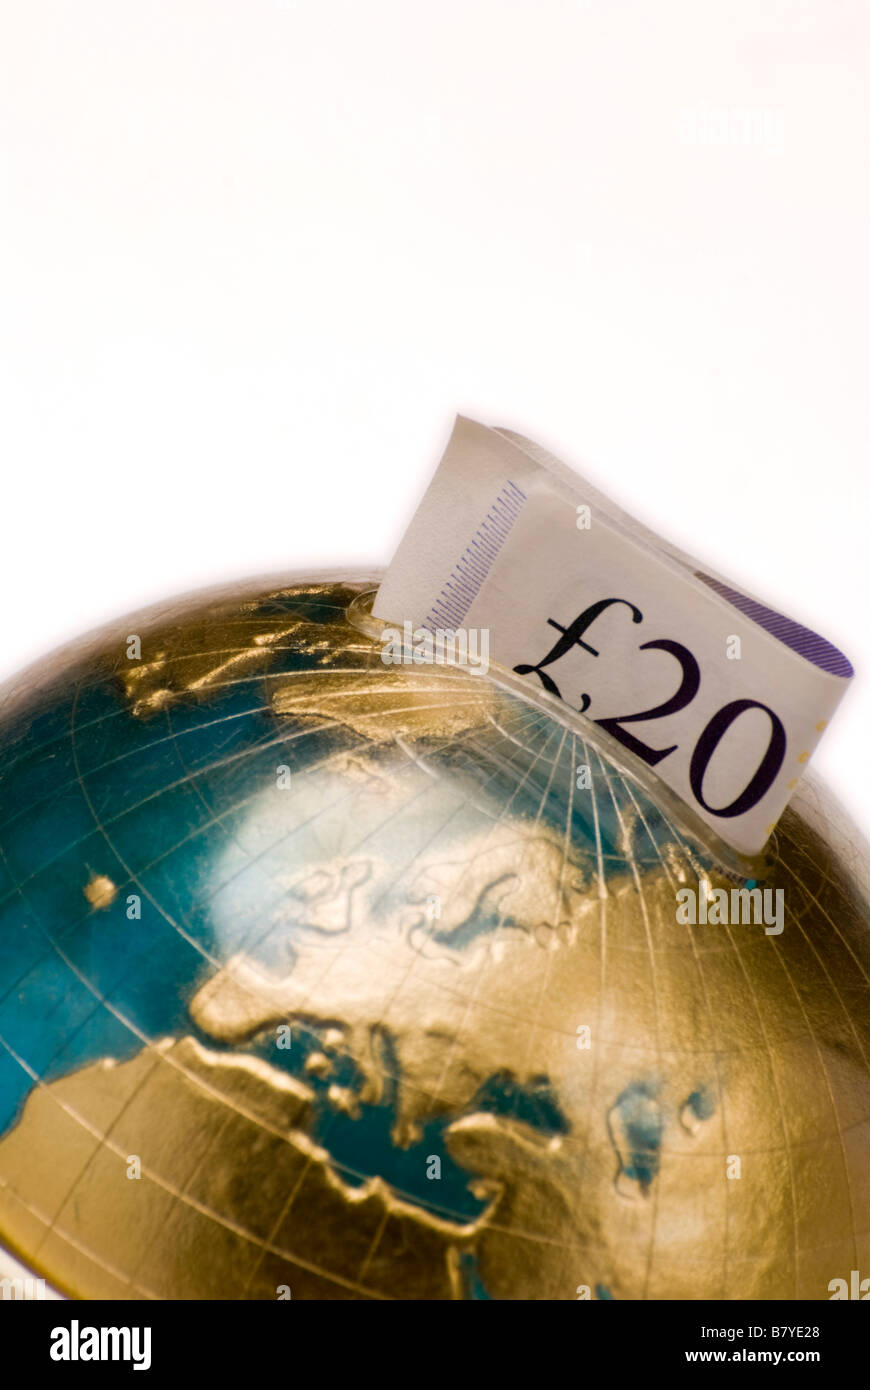 A money box in the shape of a globe Stock Photo